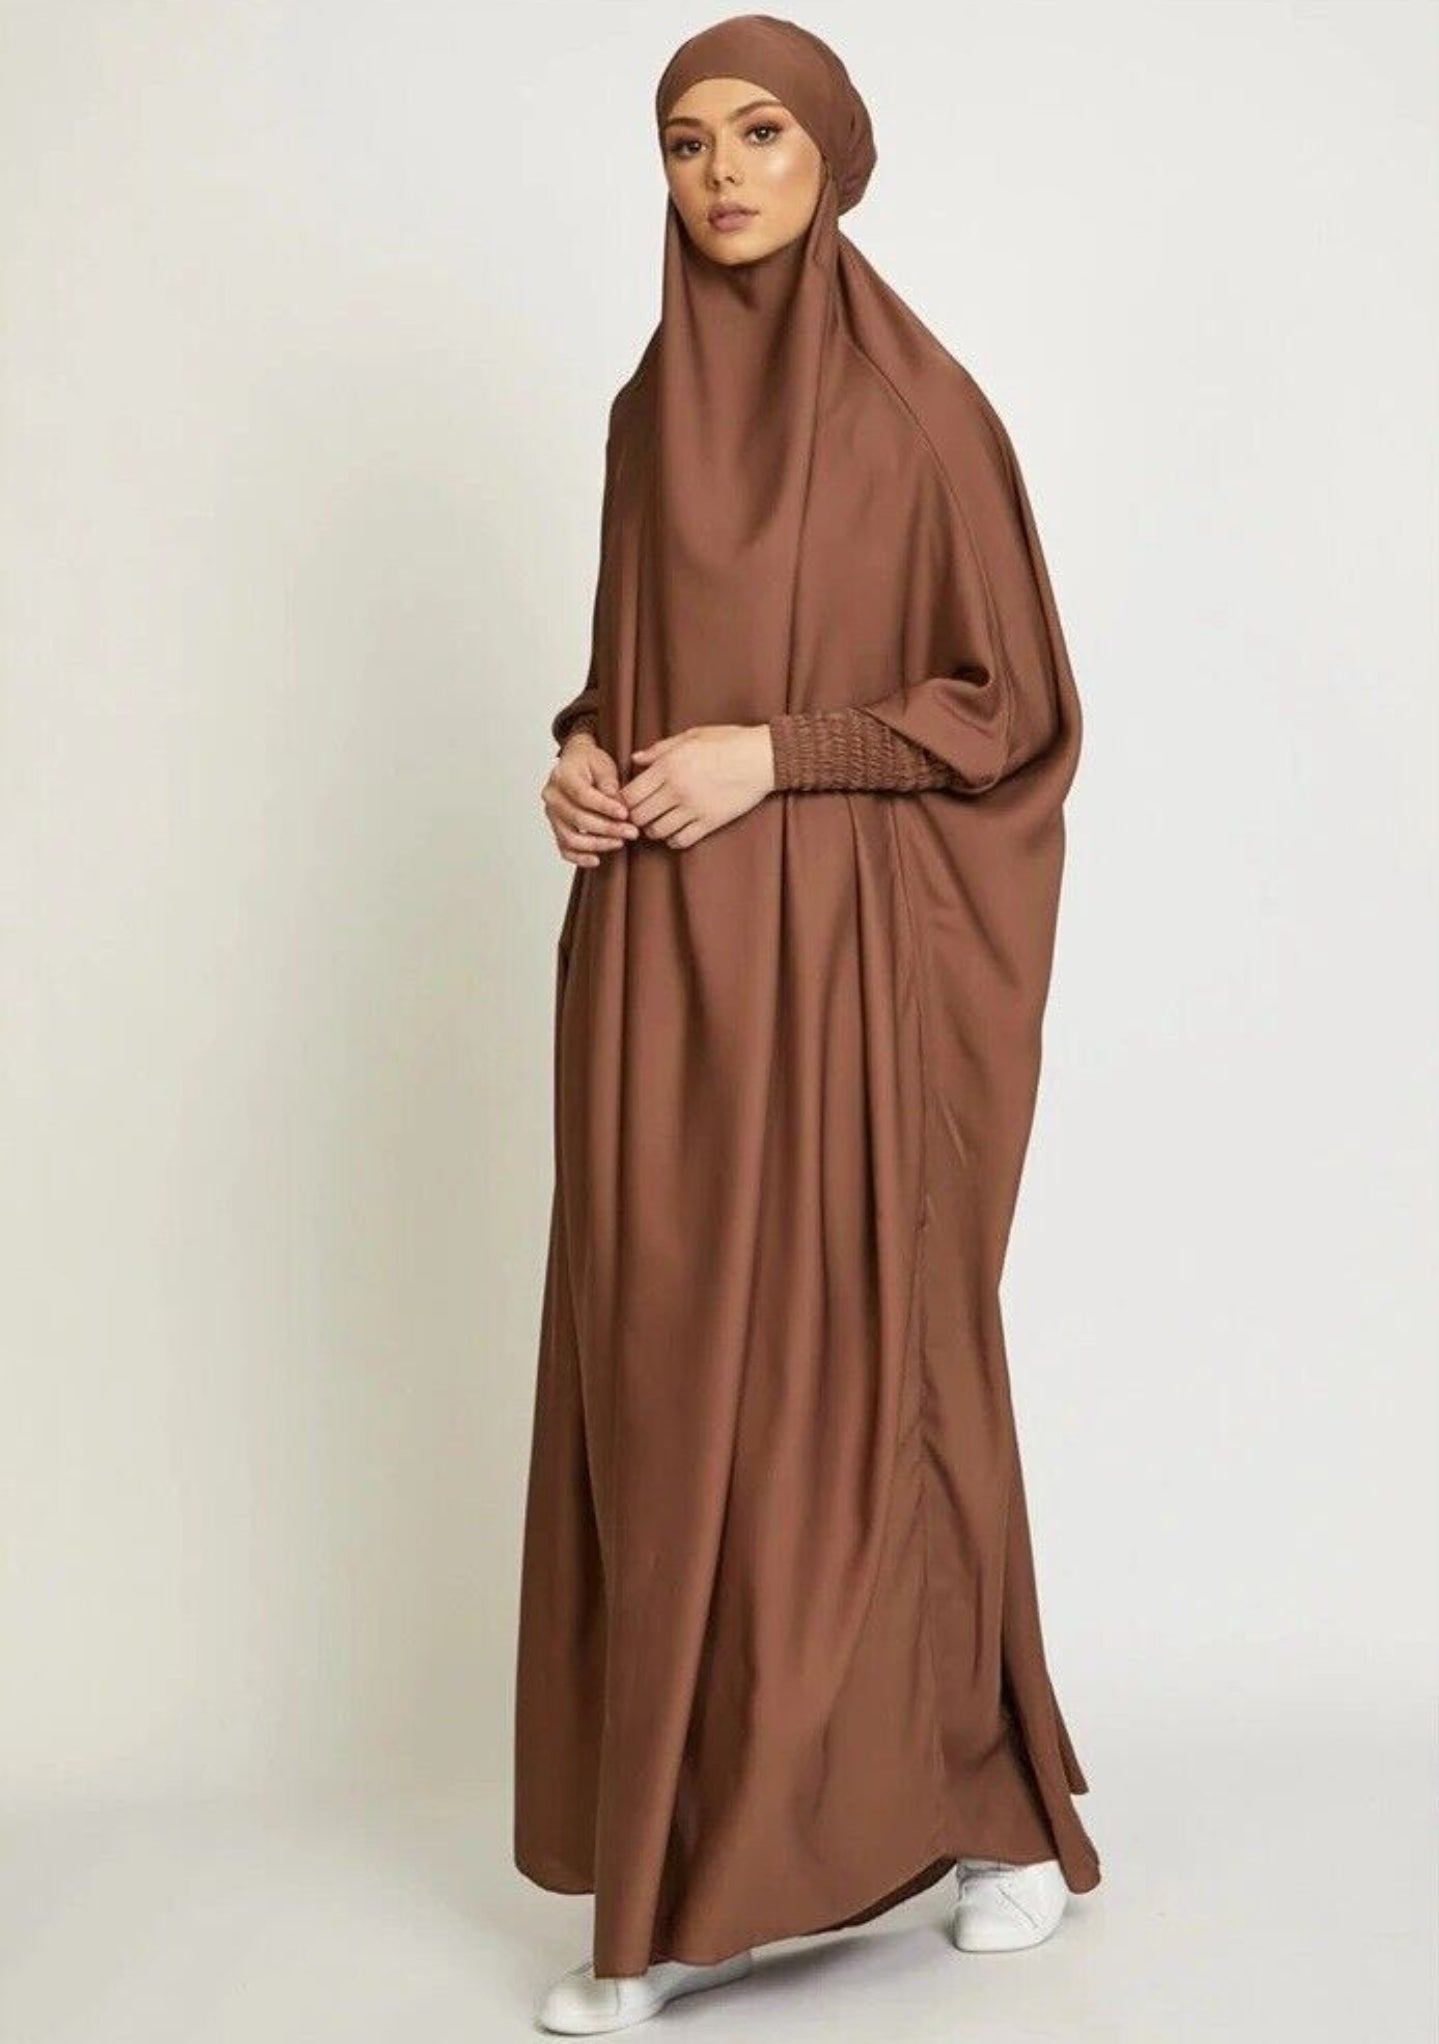 Embrace warmth and elegance with our Coffee One Piece Tie-Up Jilbab. Tailored from premium satin material, this exclusive Islamic garment offers both comfort and opulence. Discover the perfect blend of modesty and style at Hikmah Boutique.